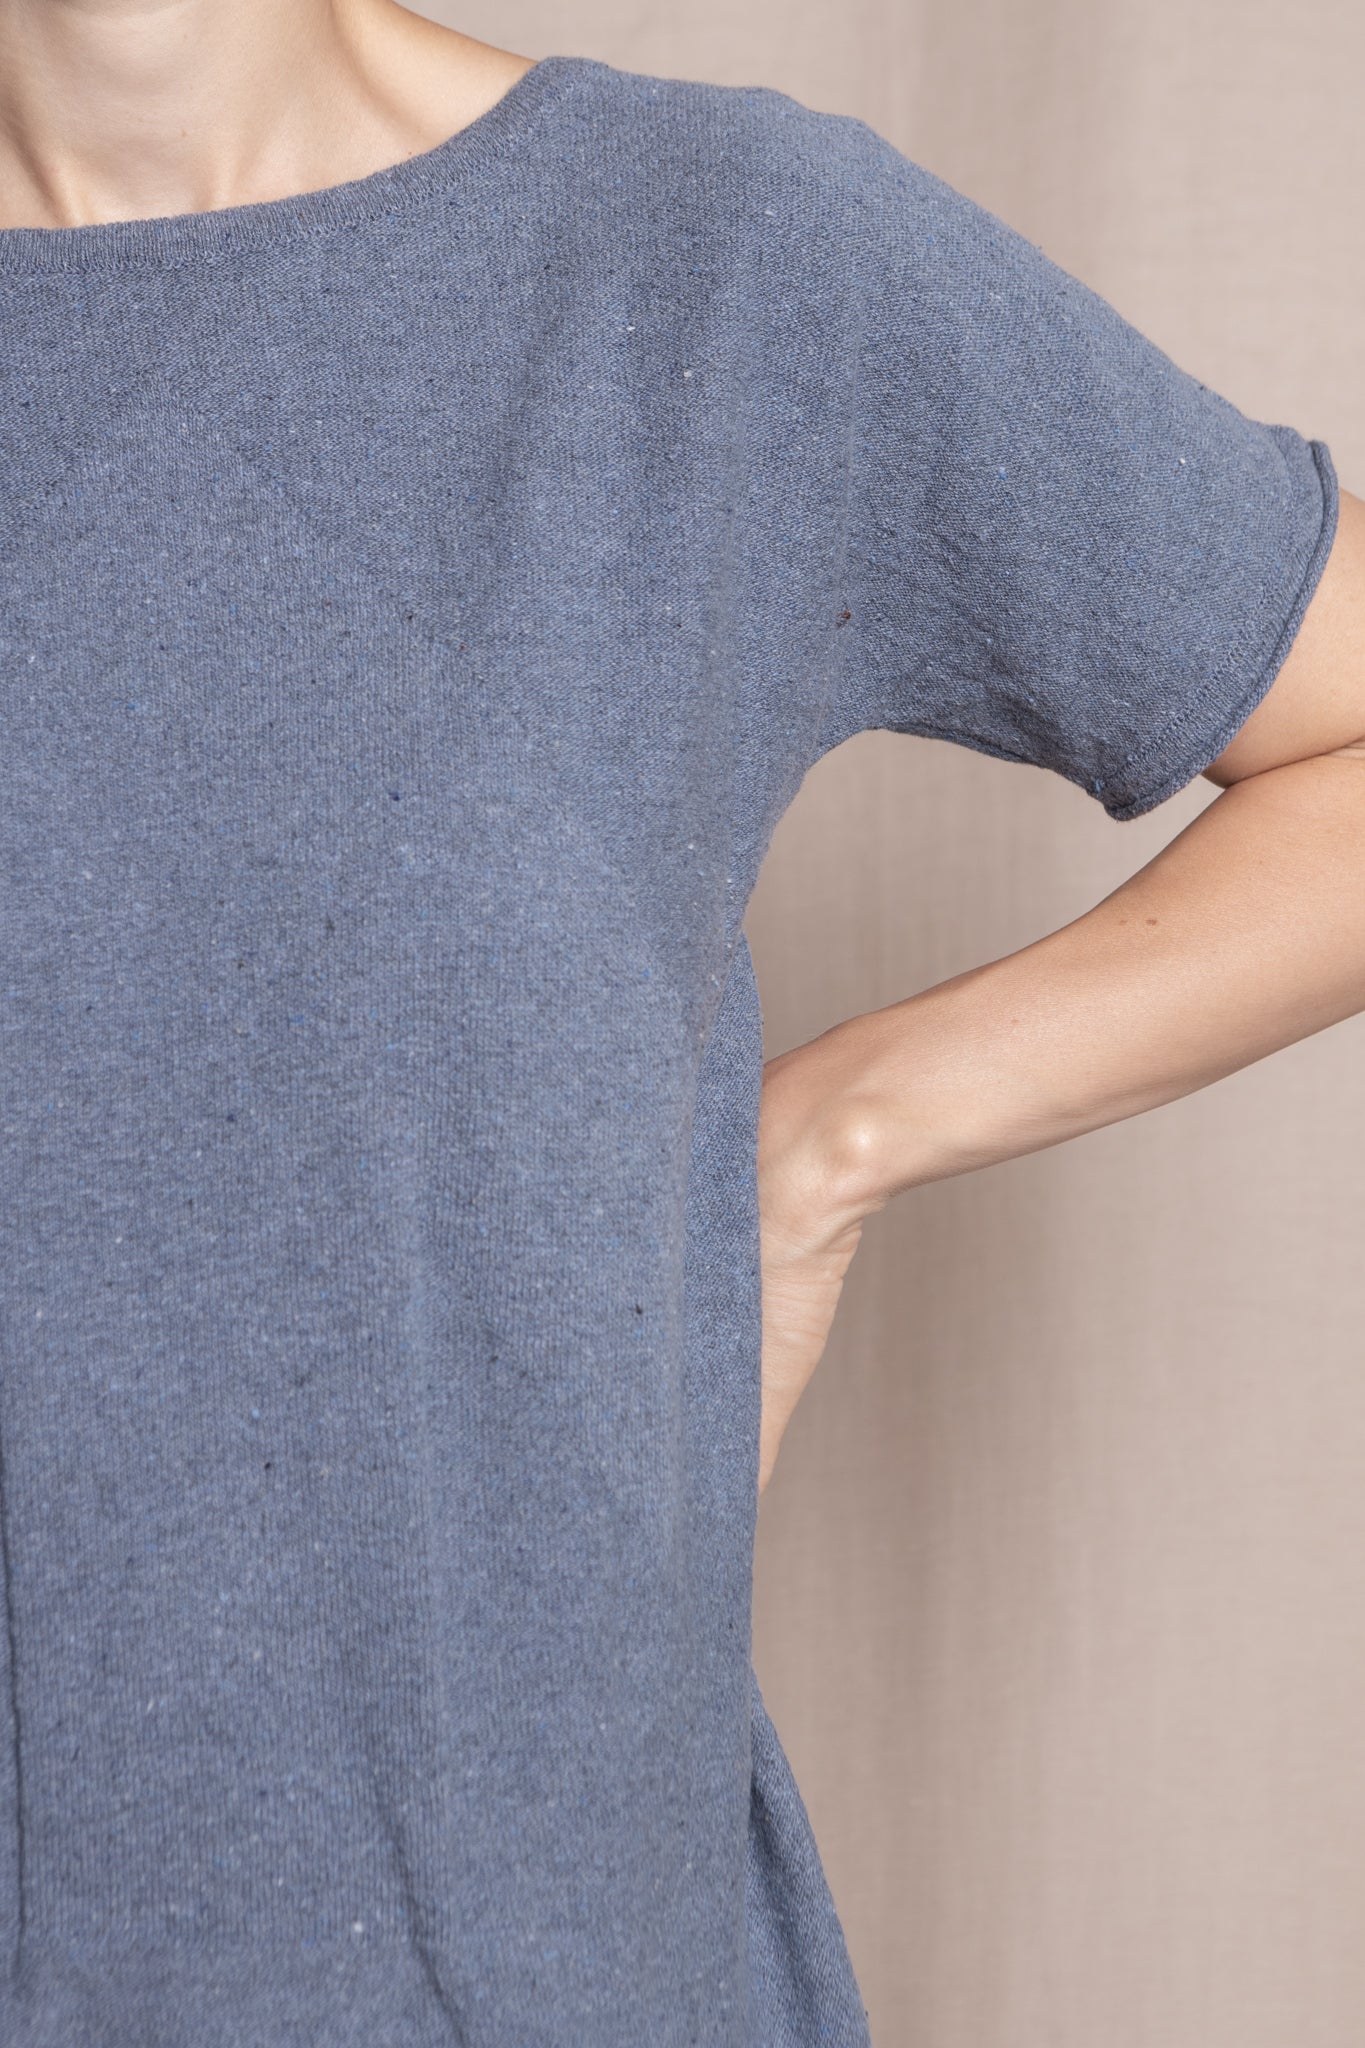 Knitted t-shirt from recycled denim | Blue - Reet Aus